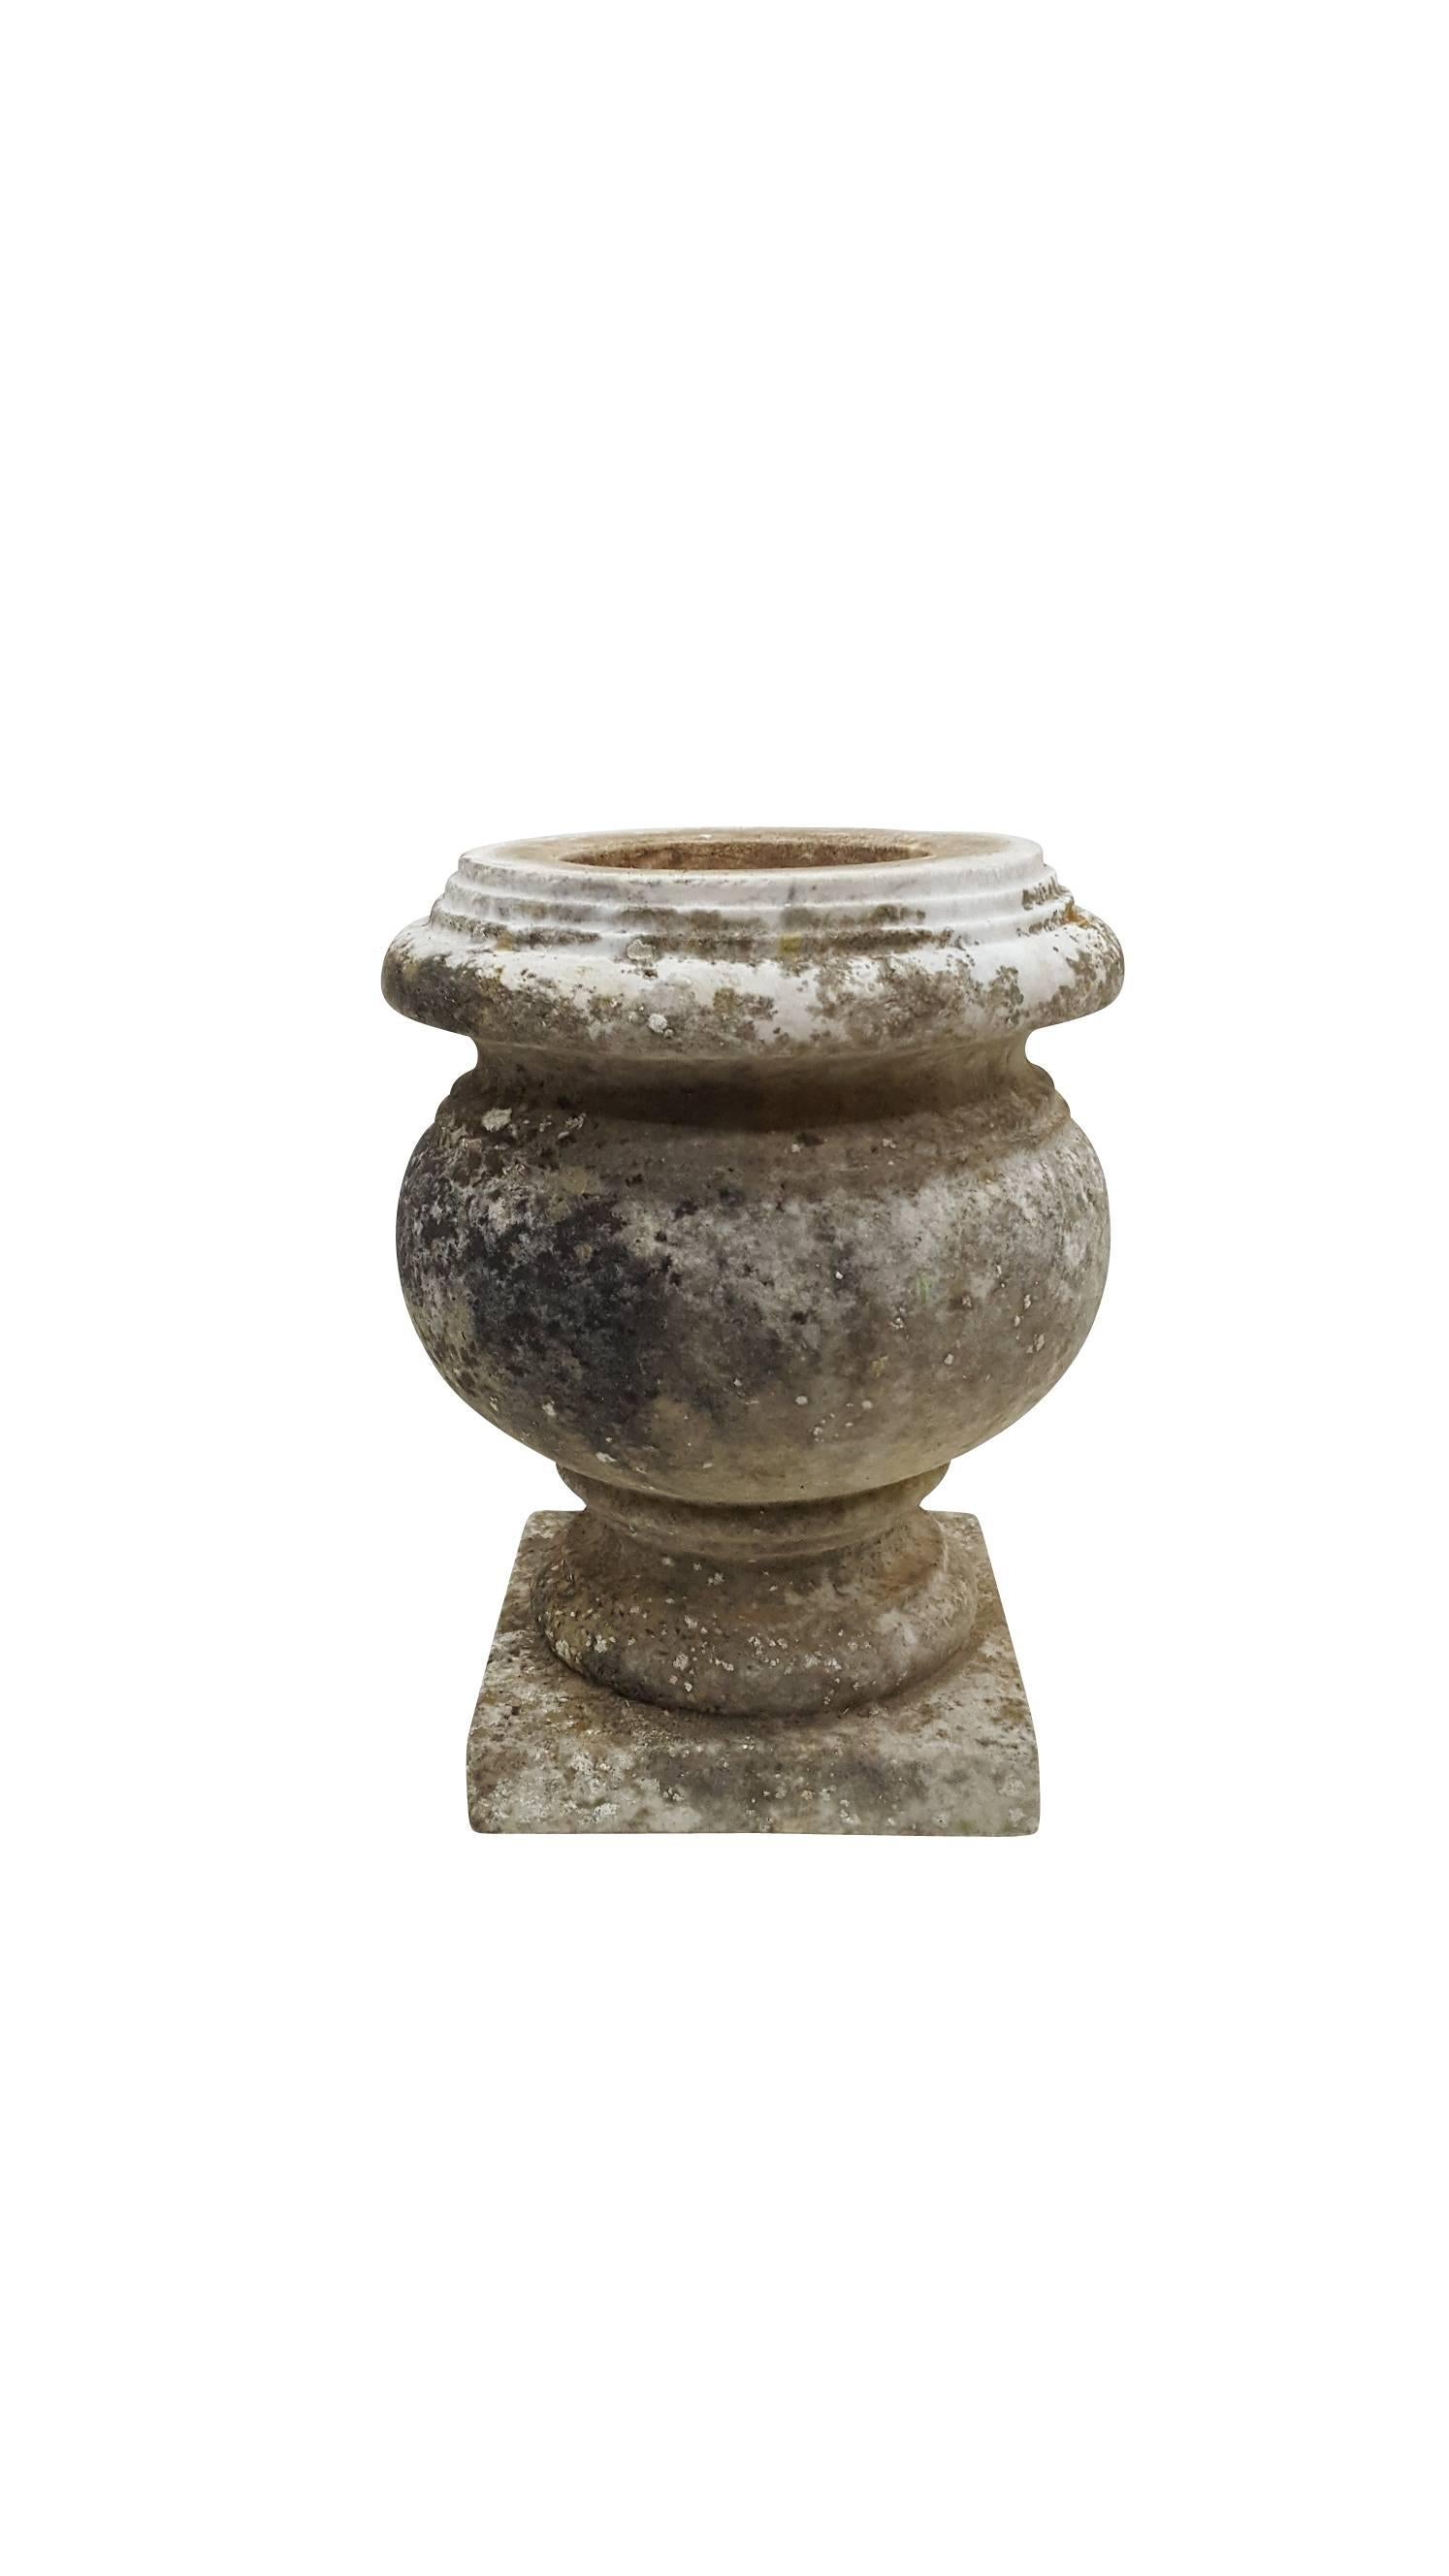 Beautiful 19th century antique stone urn finial, small.